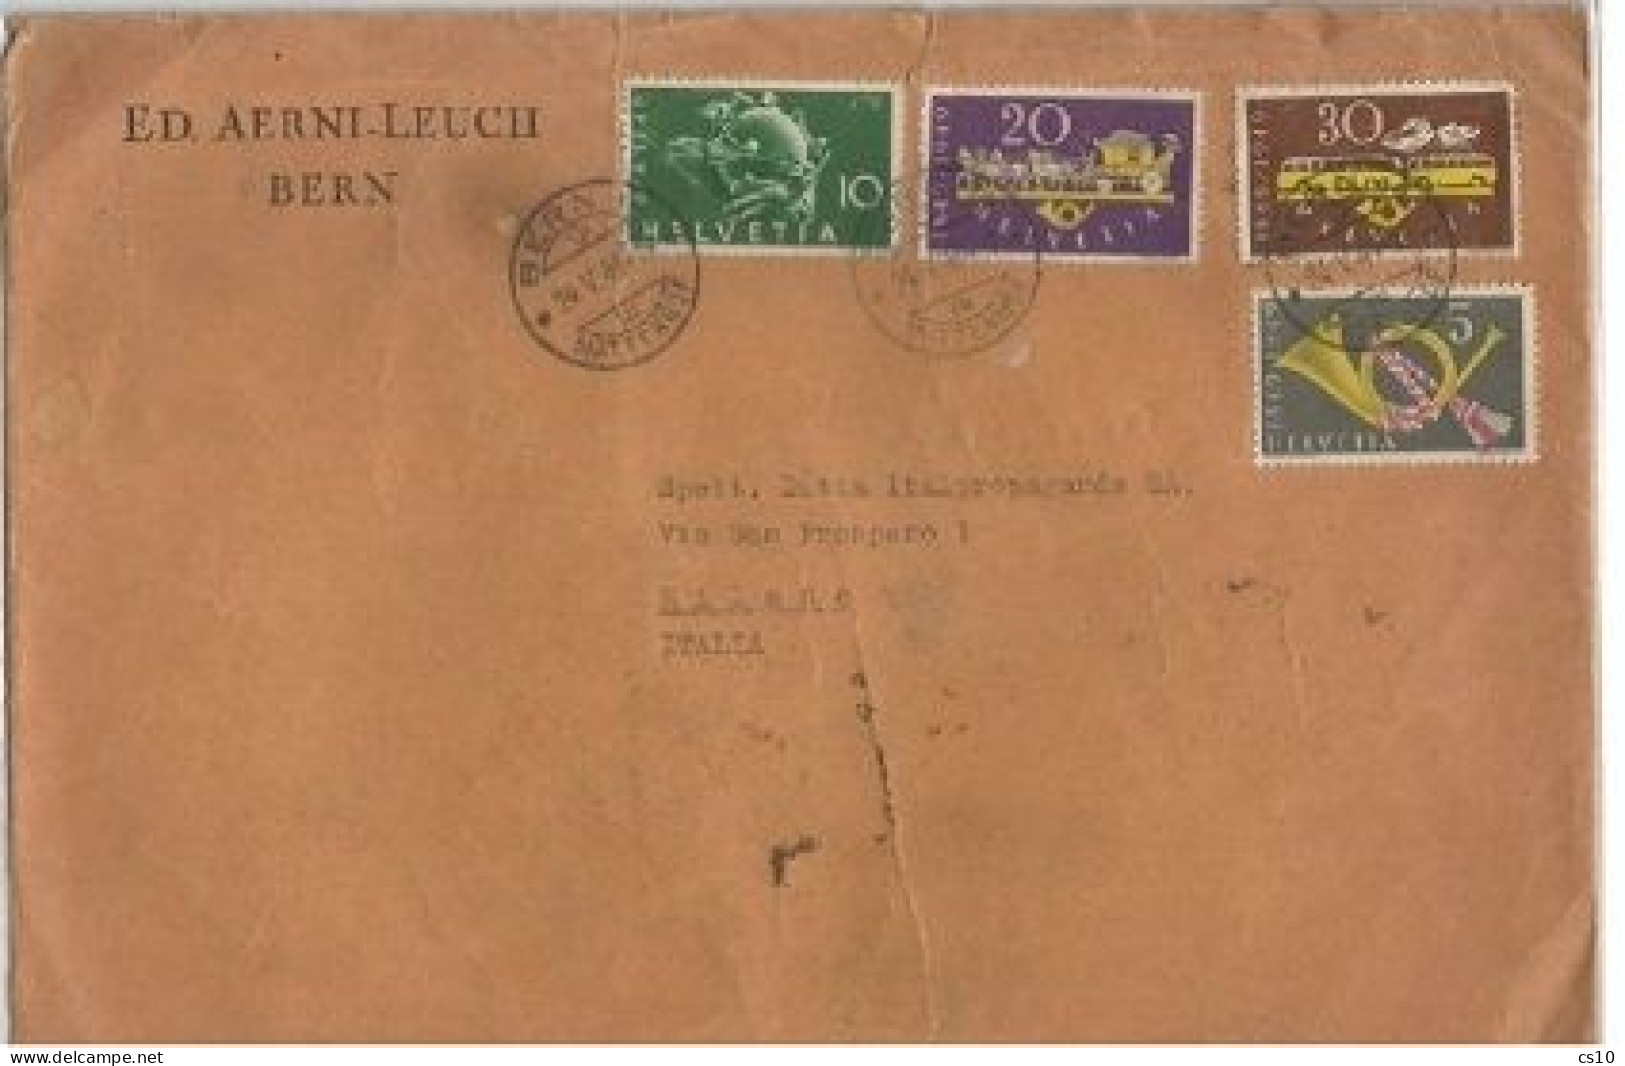 Suisse Bern 24may1949 CV To Italy With UPU C.5 + Nat. Postal Service 3v - 1st Month Of Use !!! - U.P.U.